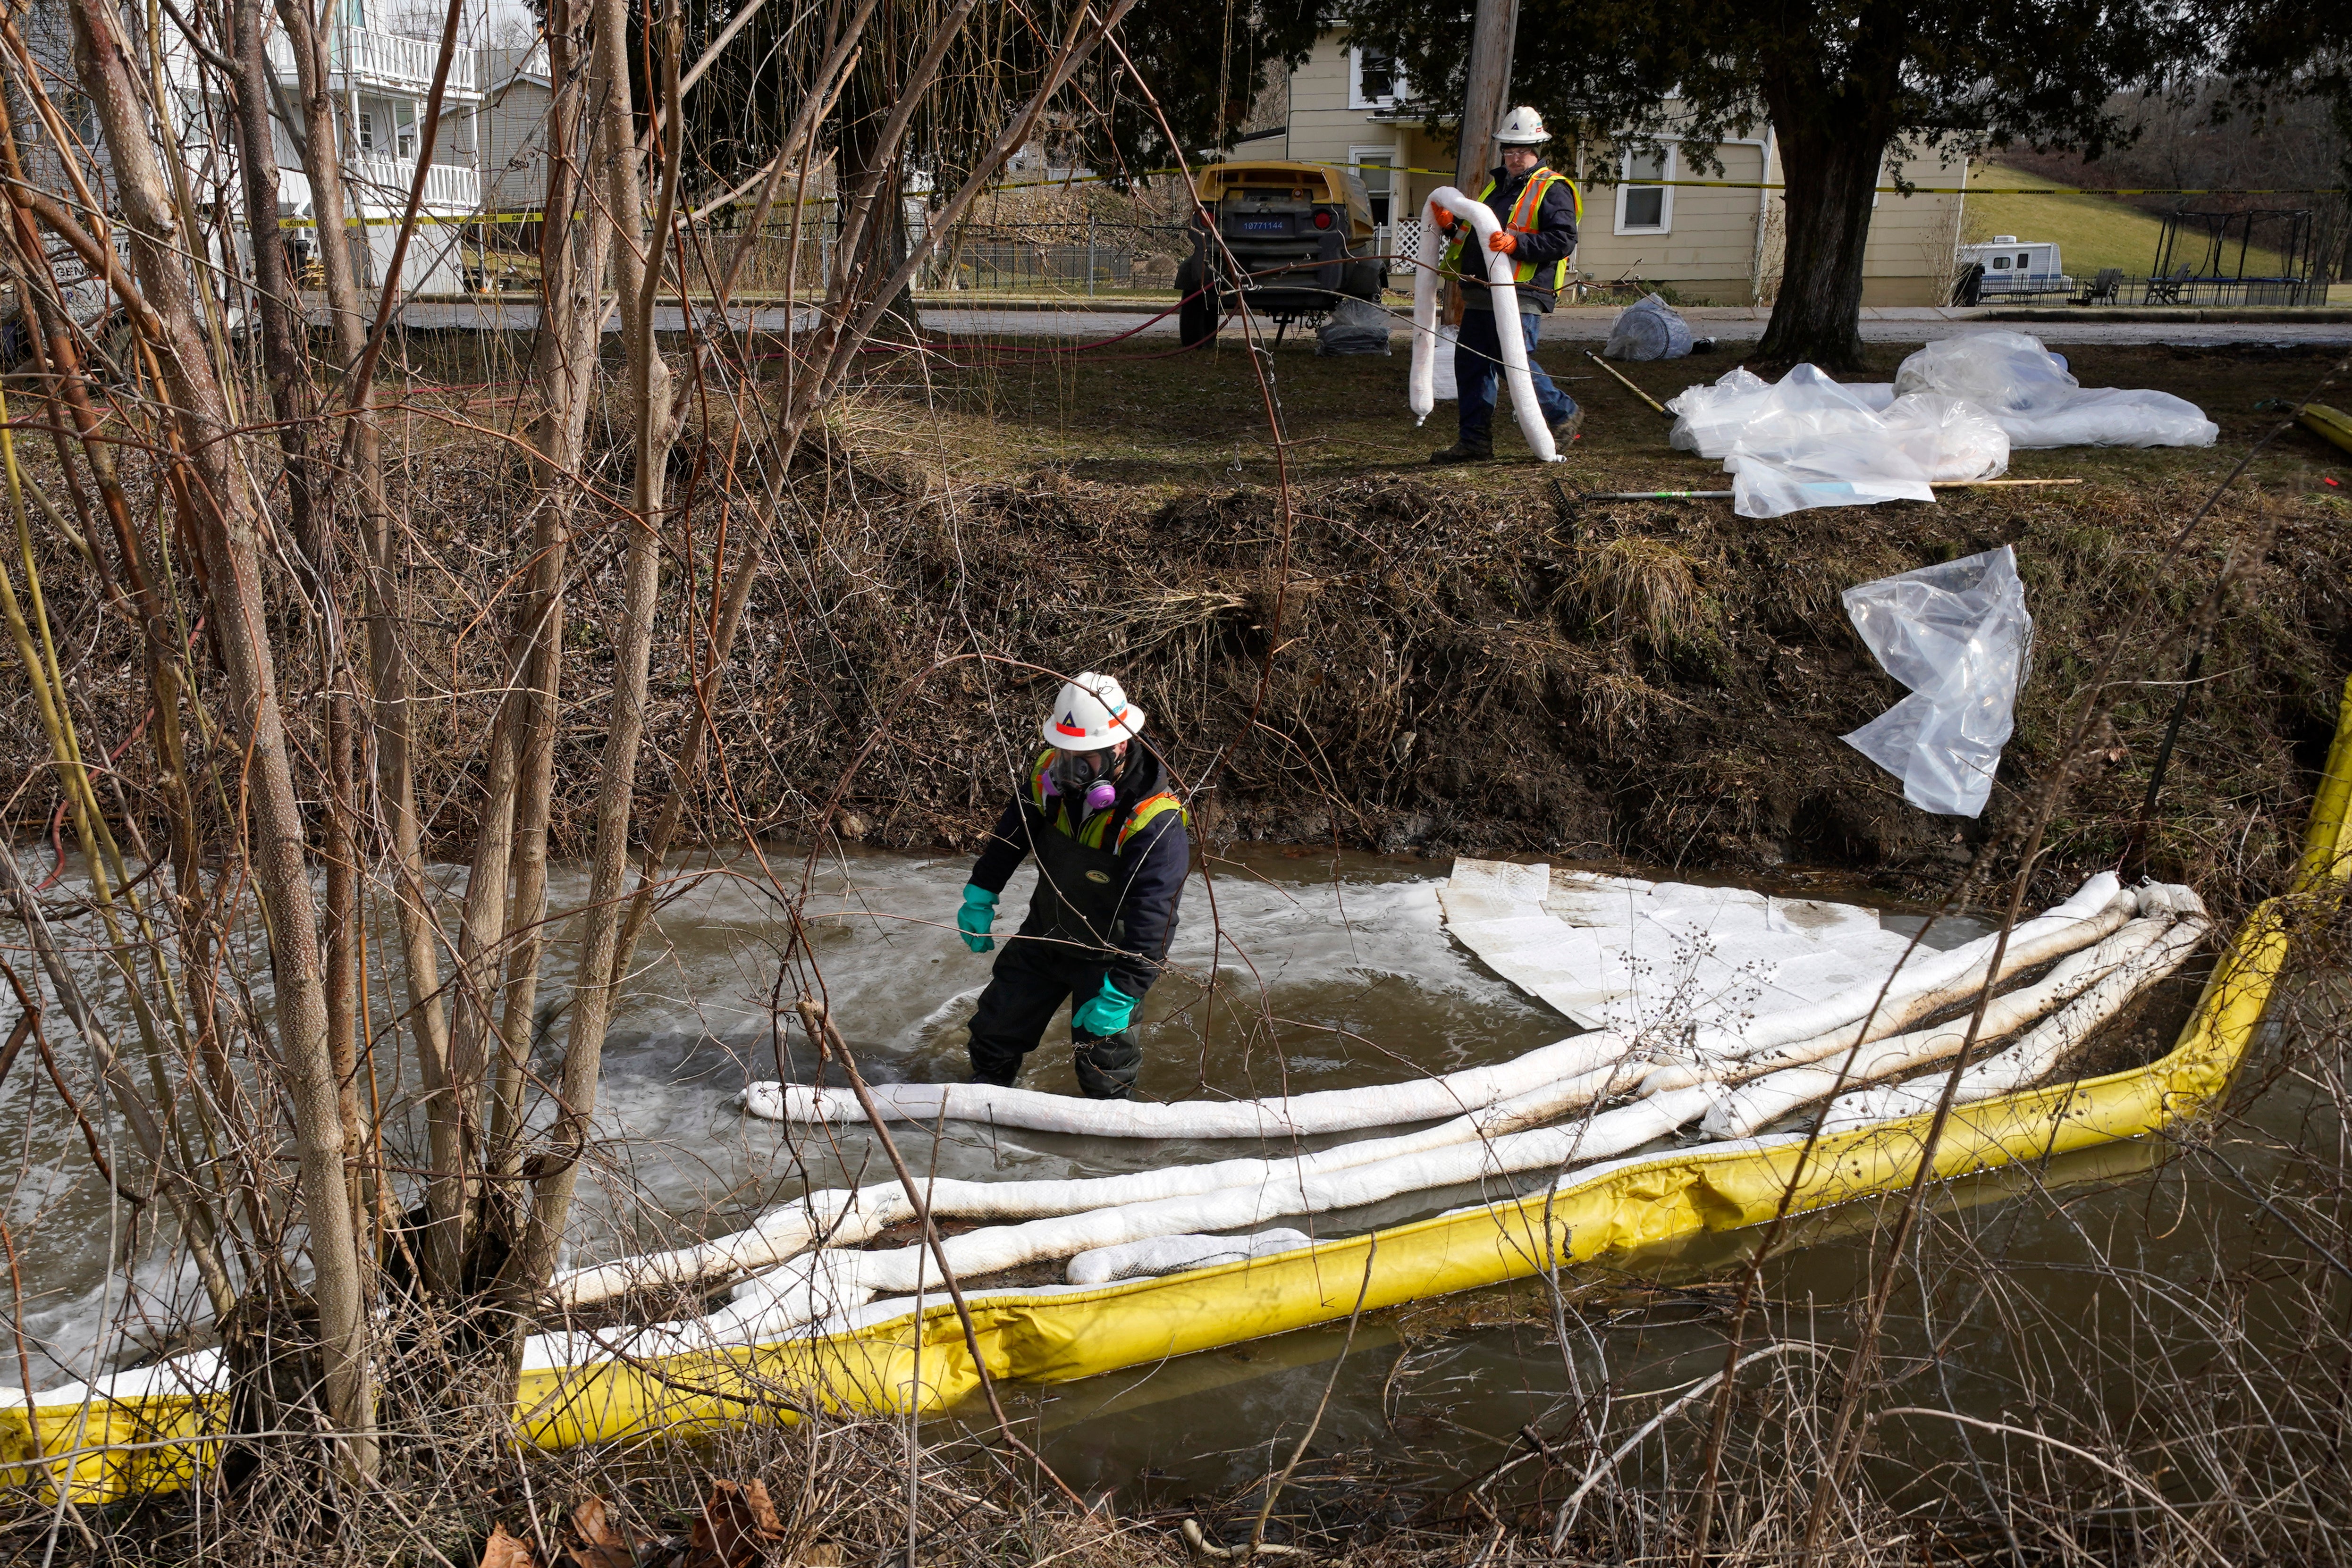 Contamination crews place booms in a stream in East Palestine, Ohio on Thursday as the cleanup continues after the derailment of a Norfolk Southern freight train